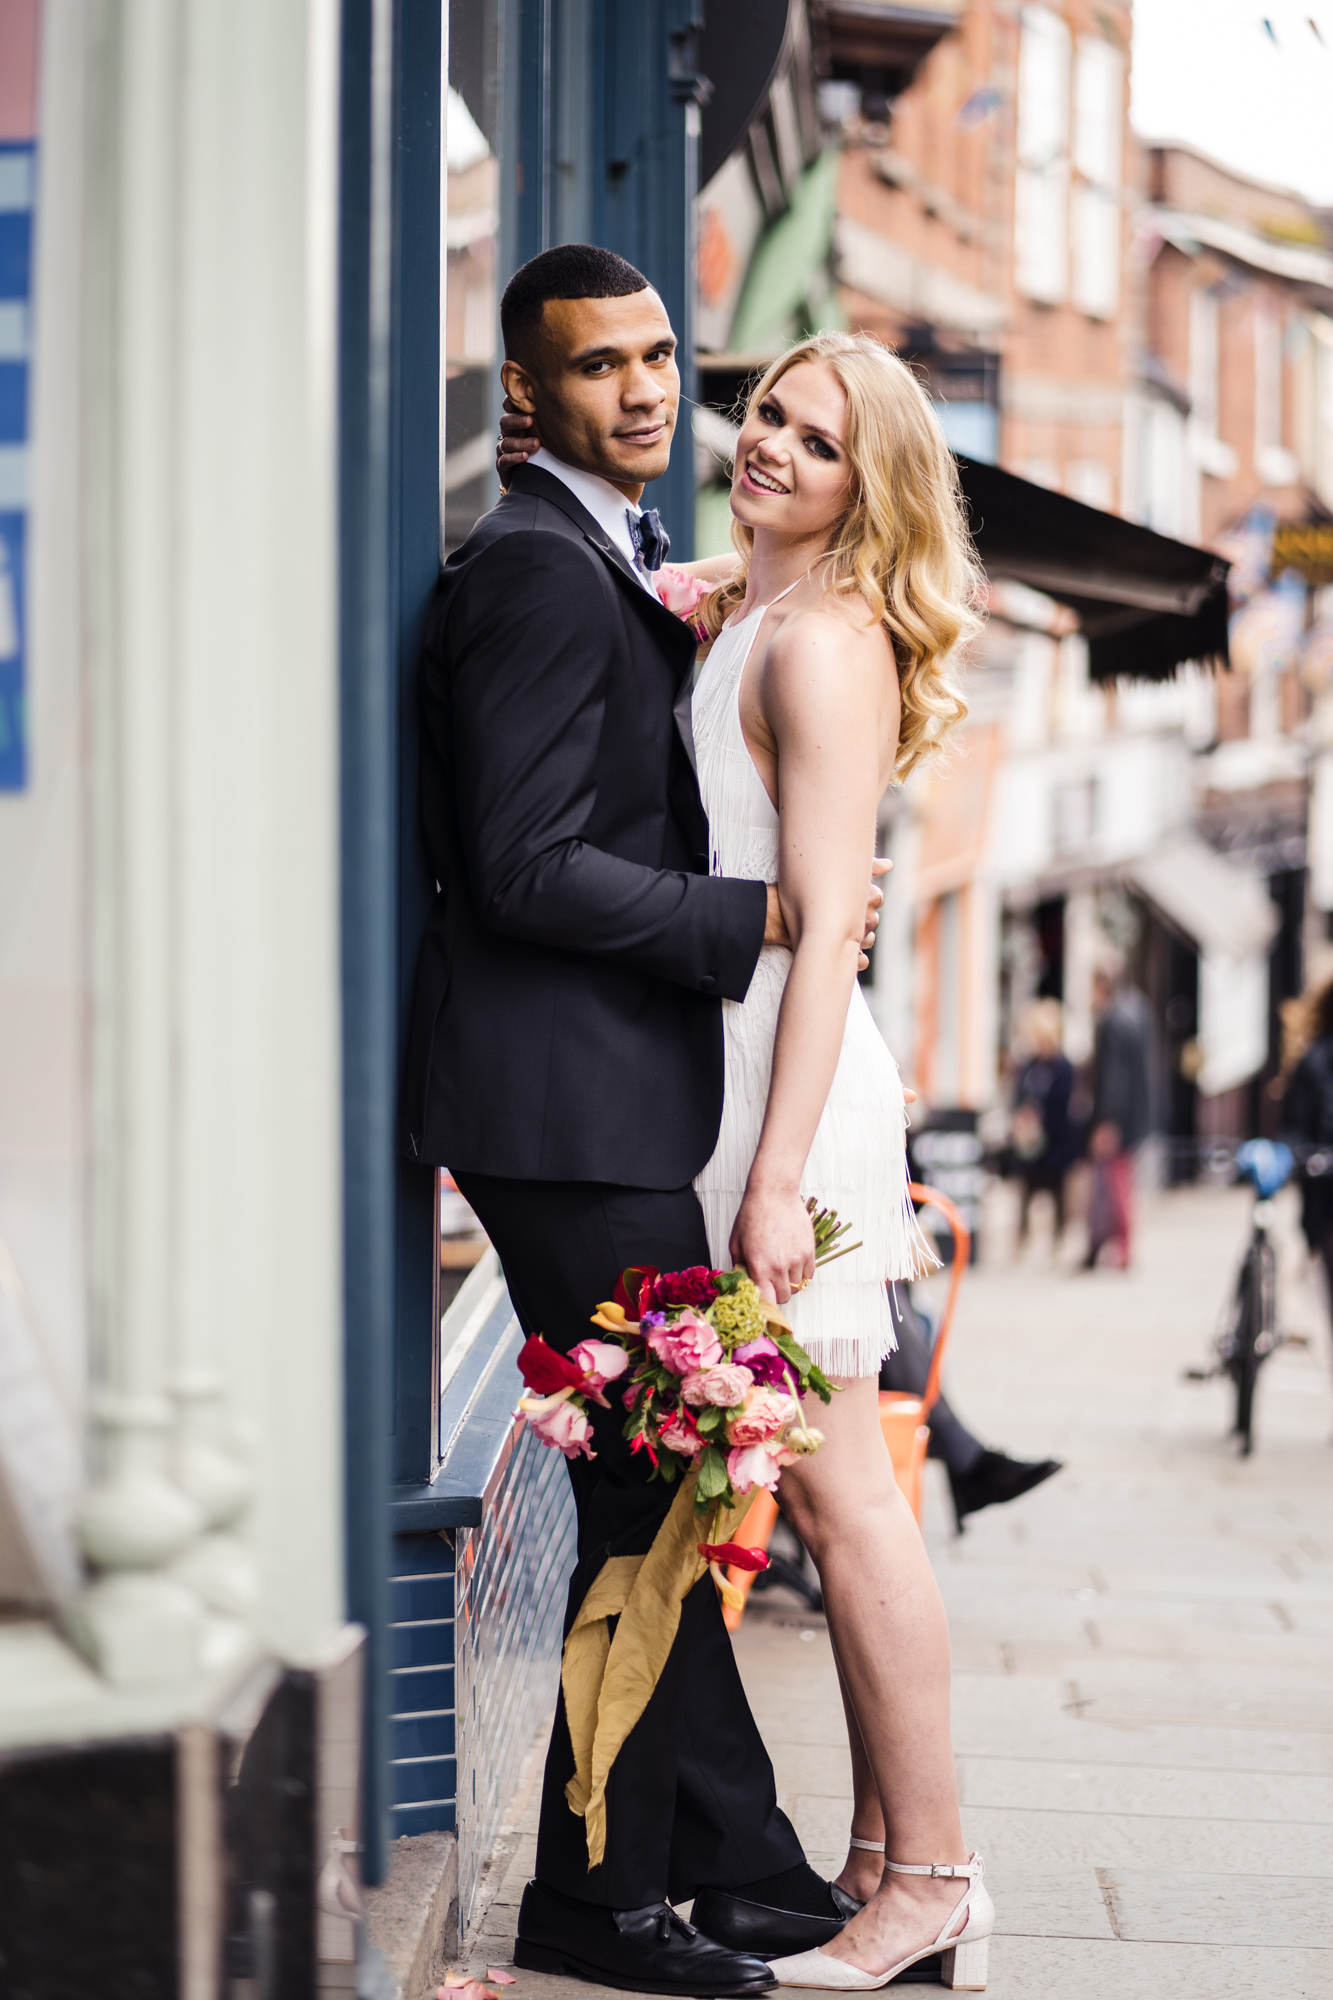 urban couple photo as bride and groom stand on city street